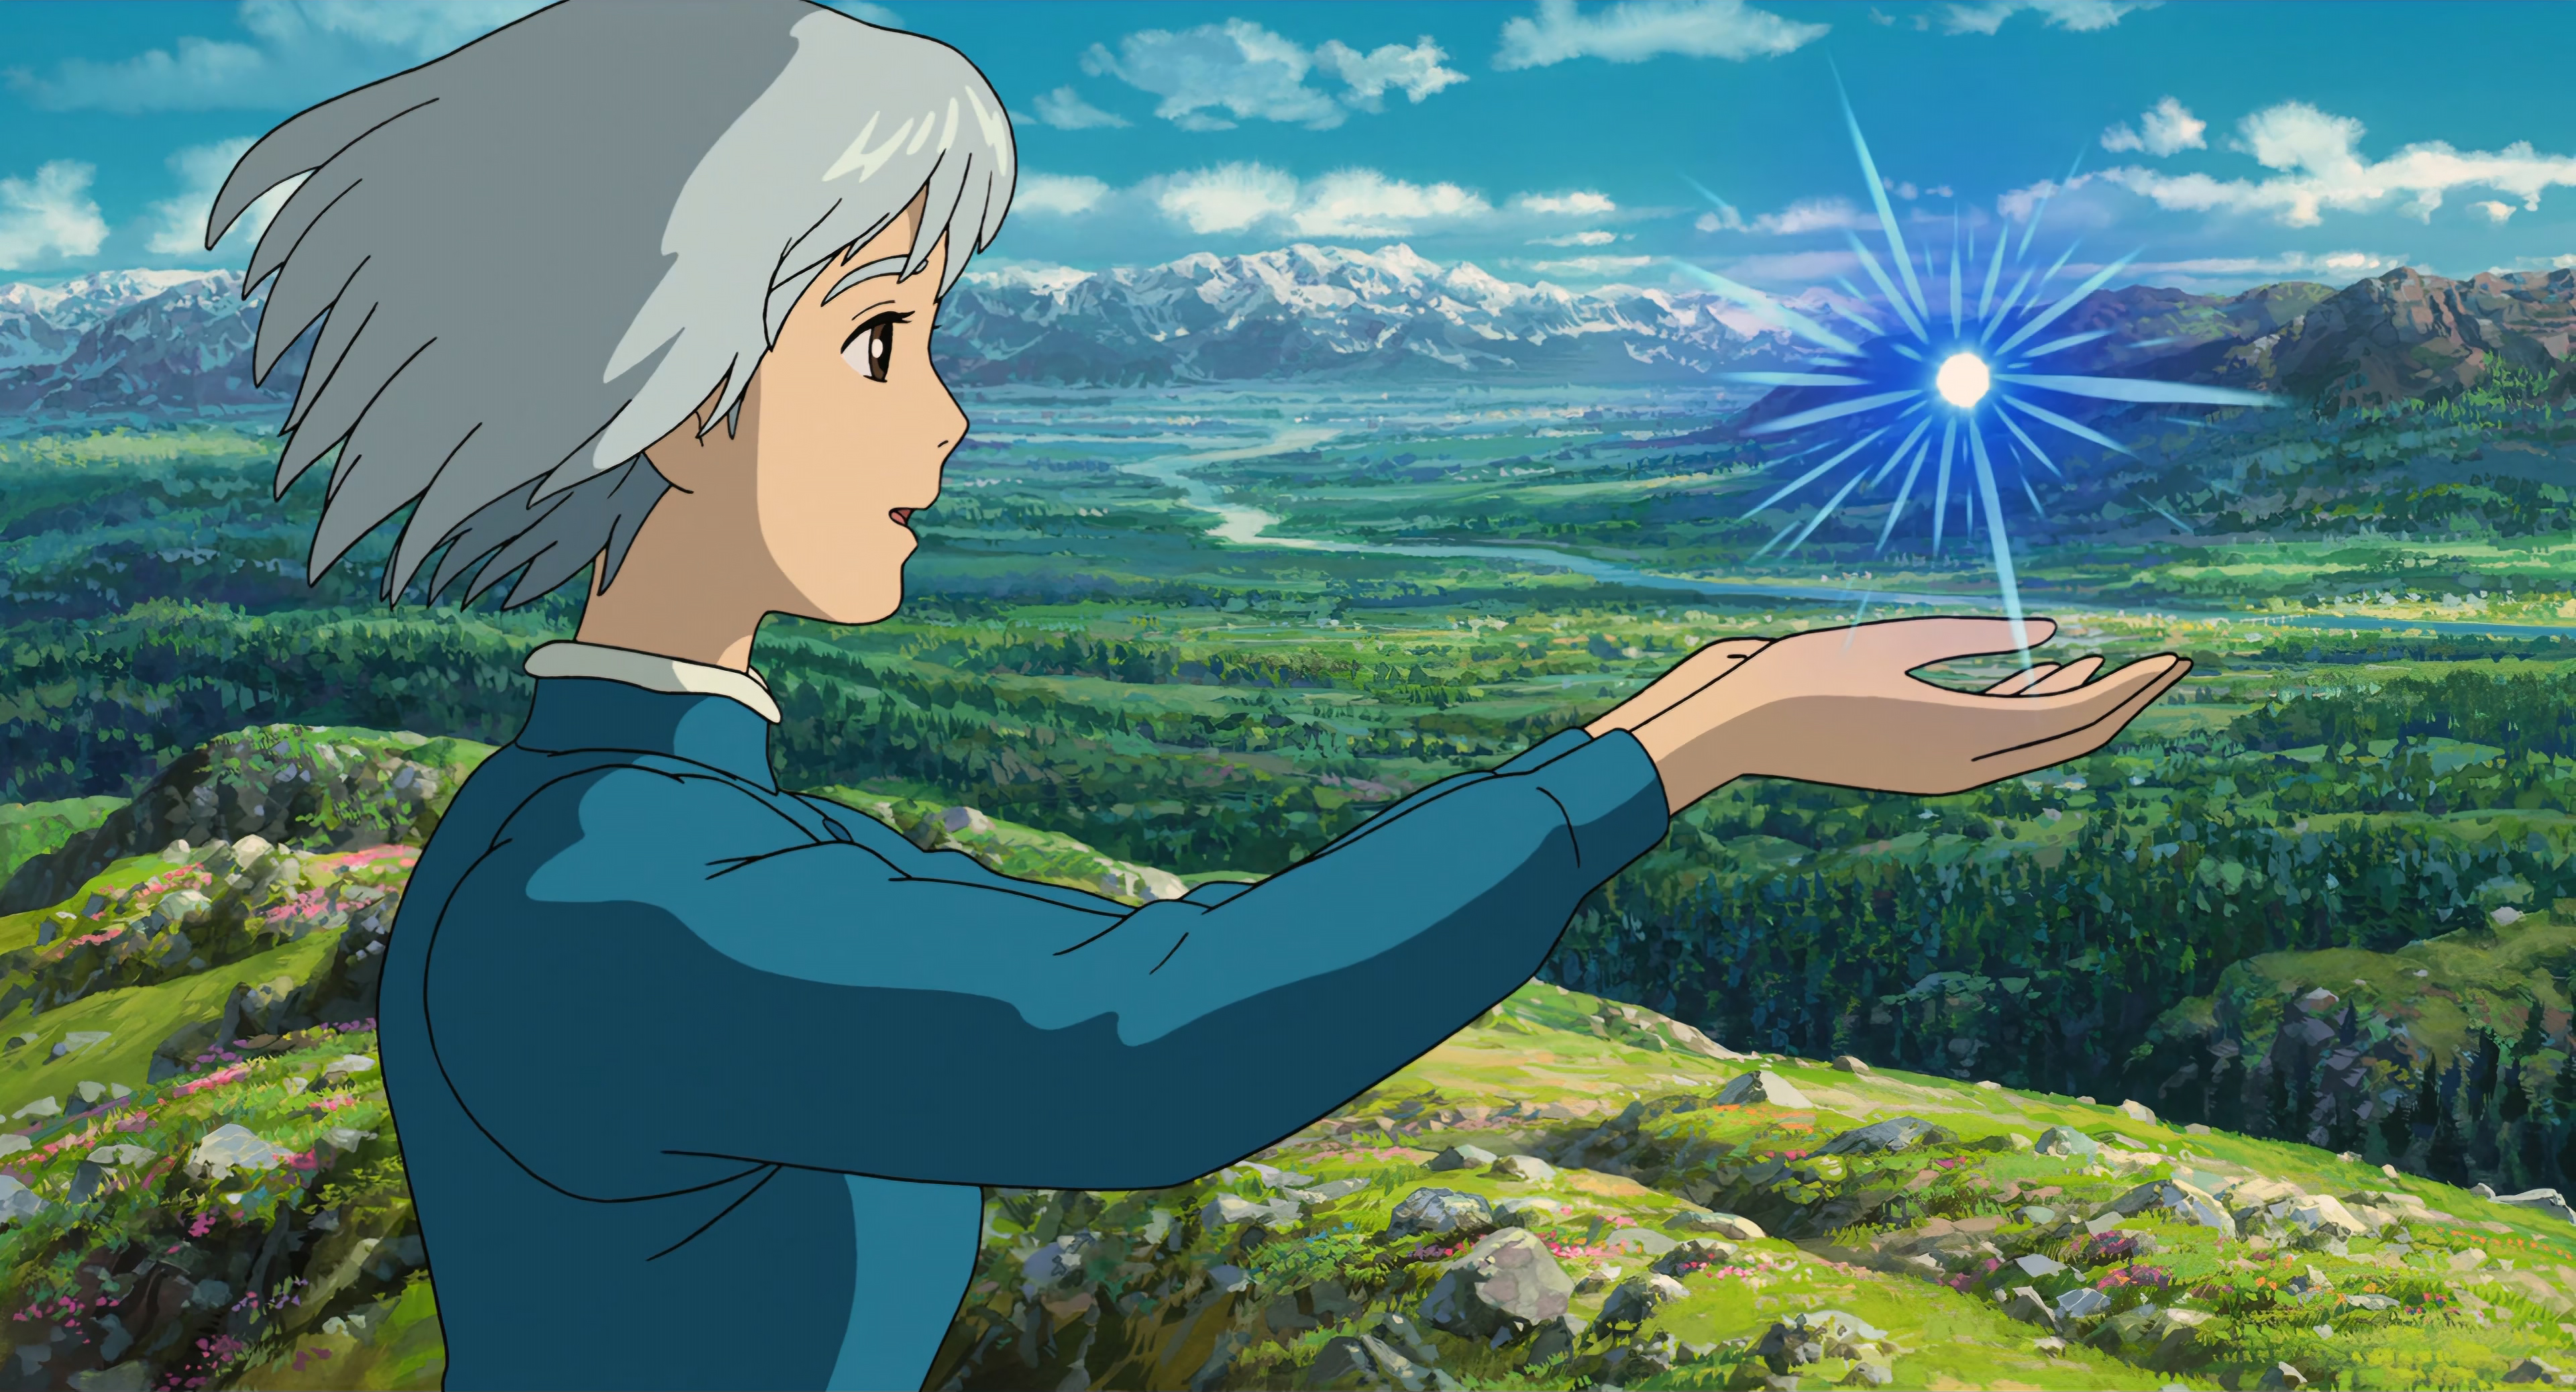 Anime 3840x2075 Howl's Moving Castle Studio Ghibli anime women long hair gray hair landscape mountains clouds Sophie Hatter fantasy art anime girls side view arms reaching long sleeves open mouth short hair